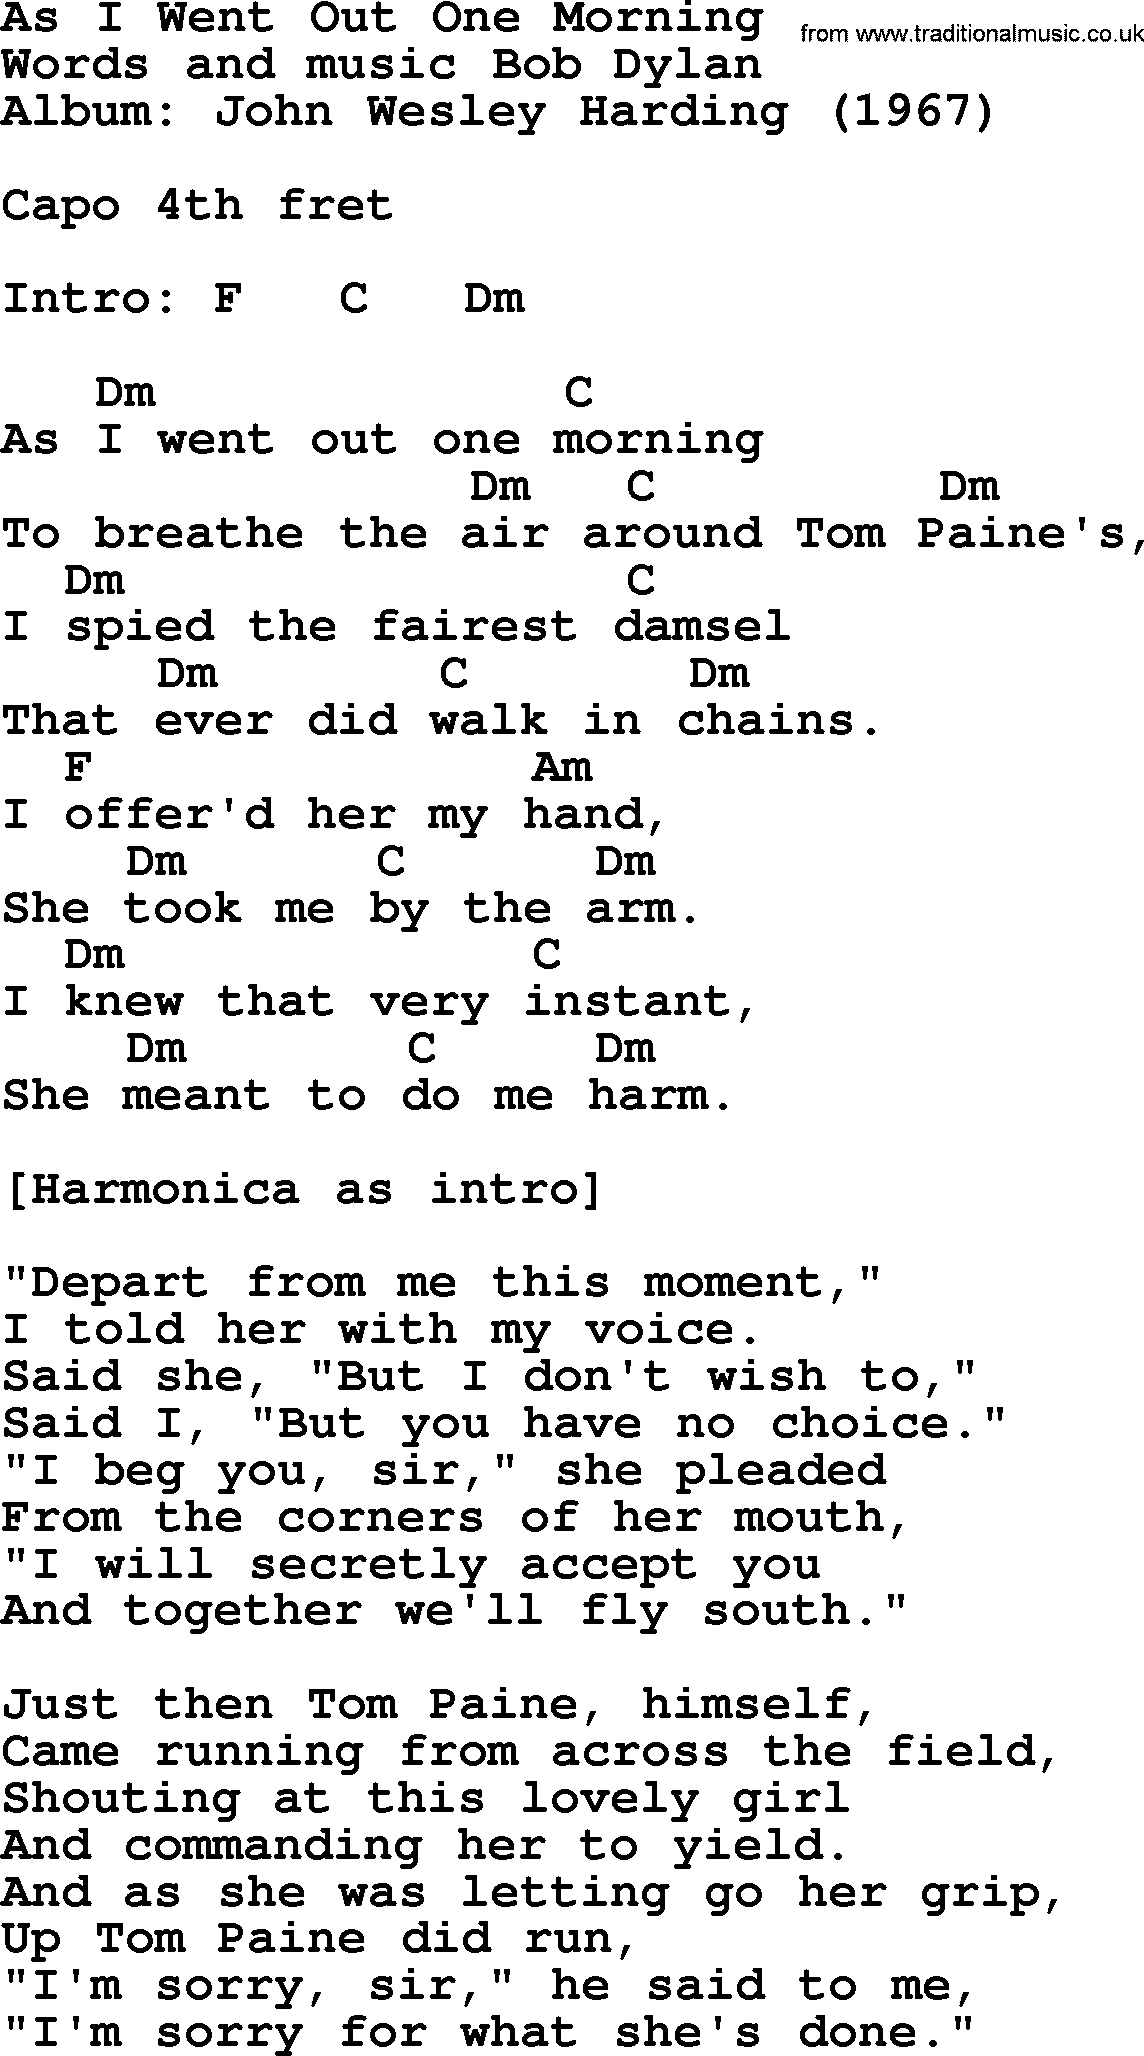 Bob Dylan song, lyrics with chords - As I Went Out One Morning